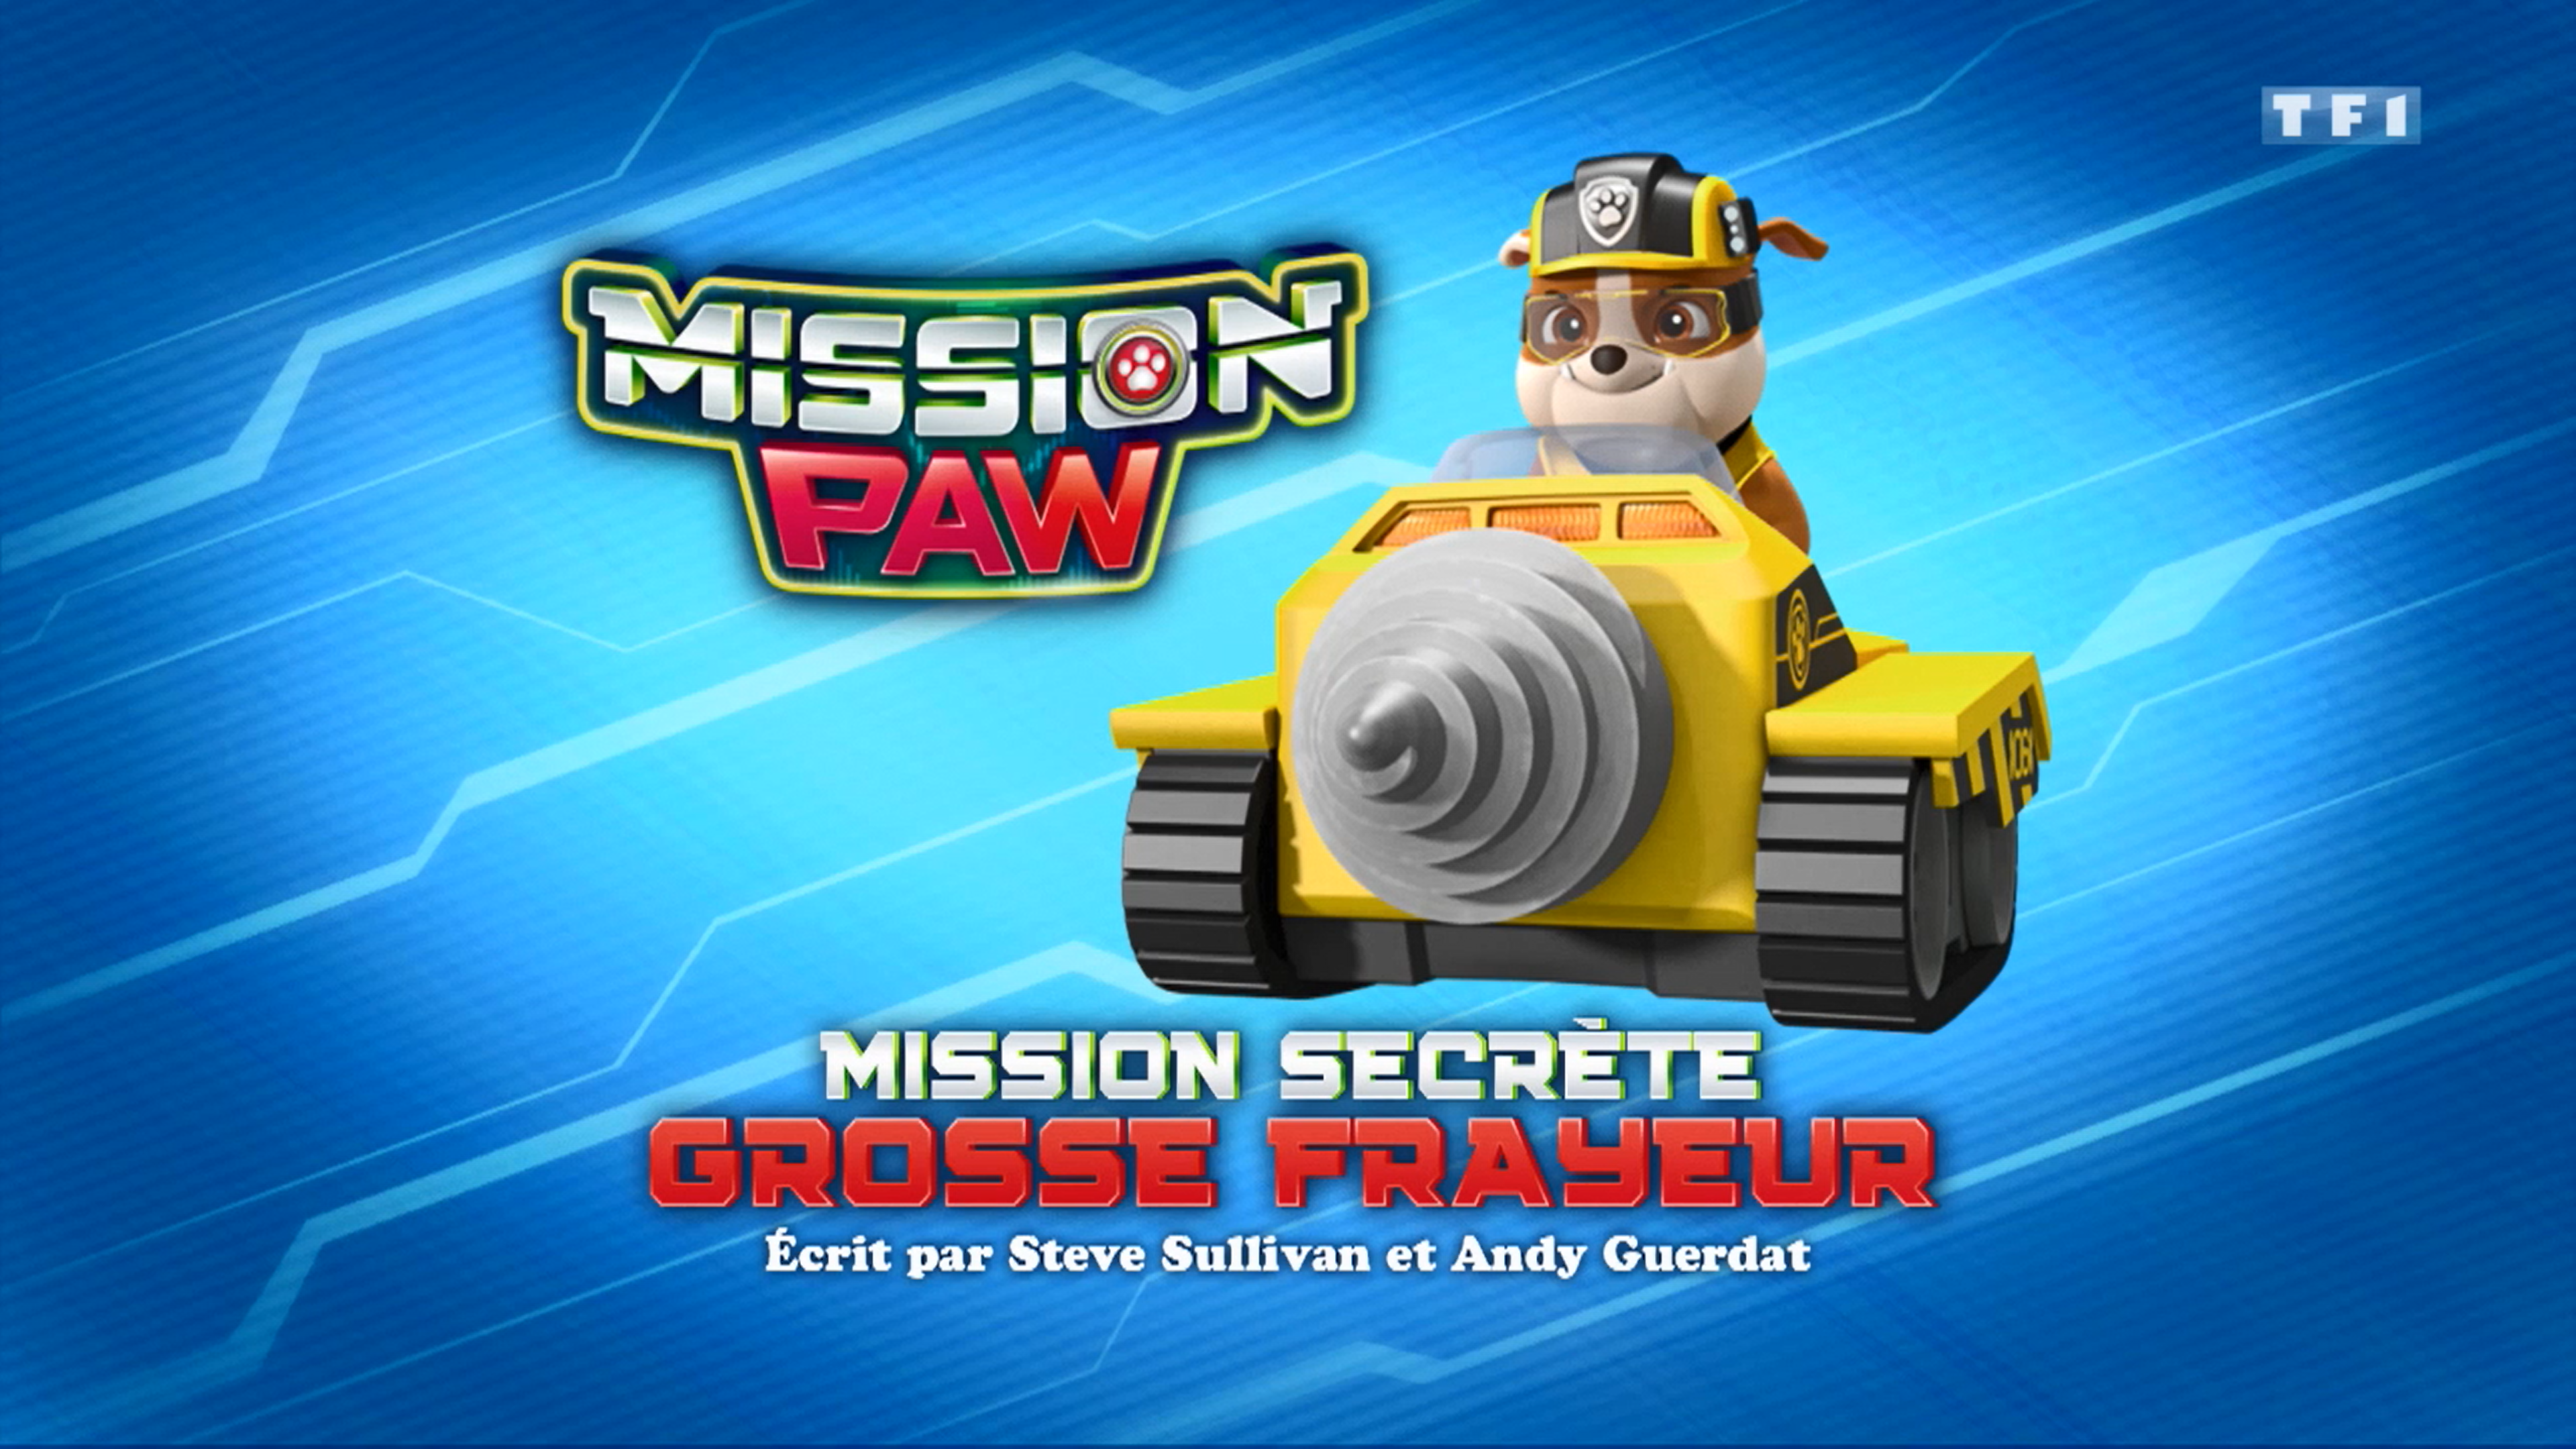 PAW Patrol - Royally Spooked! - Mission Paw Rescue Episode - PAW Patrol  Official & Friends! 